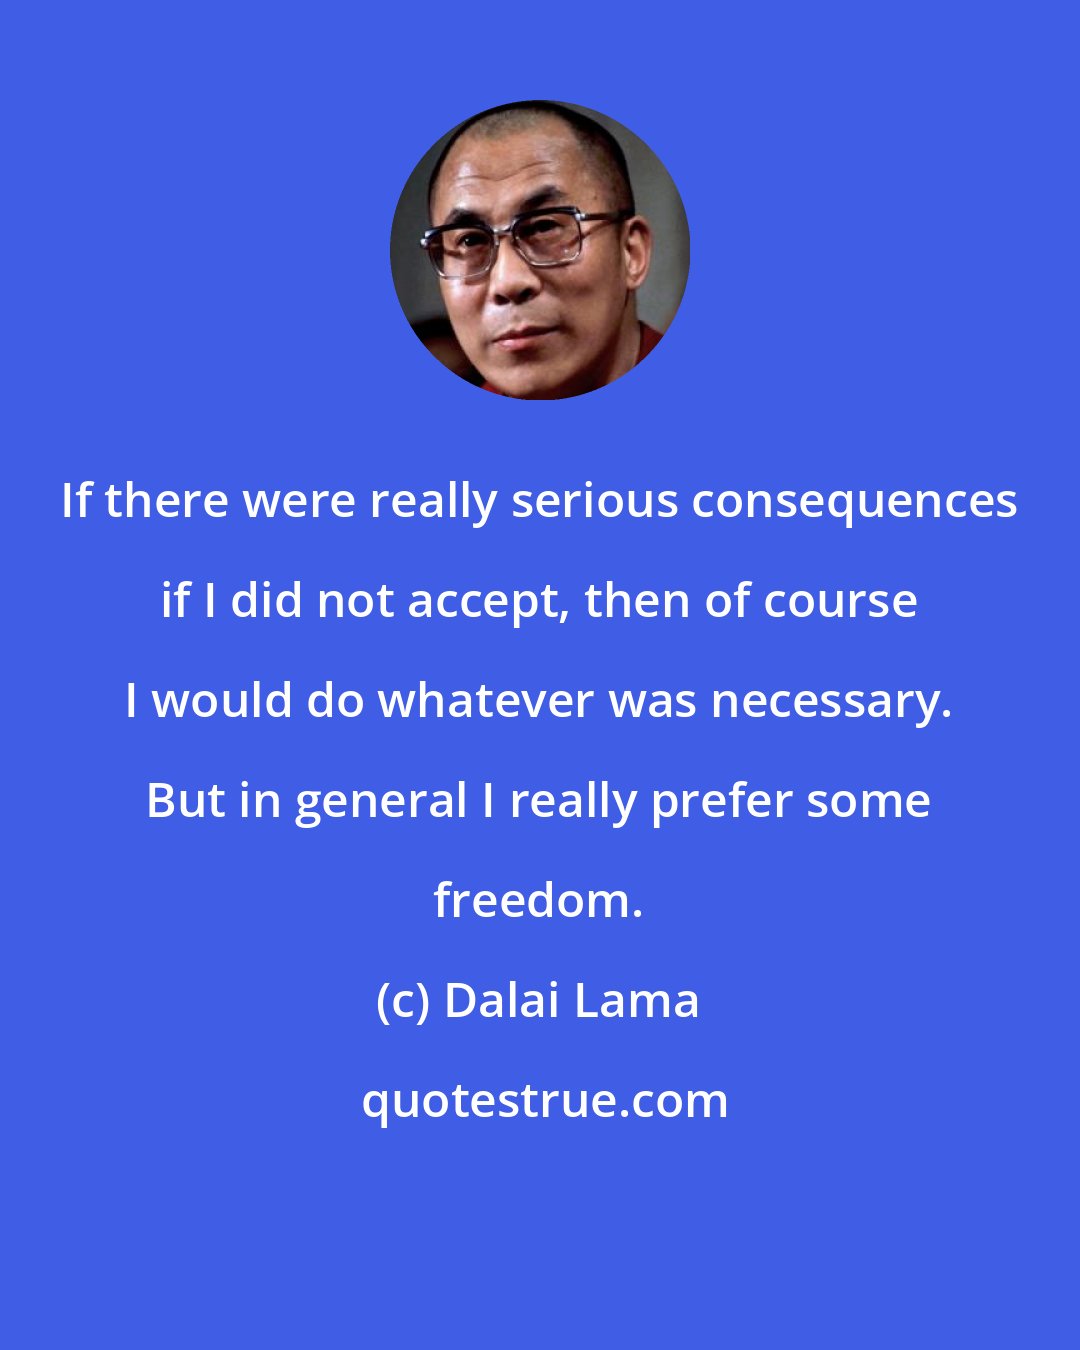 Dalai Lama: If there were really serious consequences if I did not accept, then of course I would do whatever was necessary. But in general I really prefer some freedom.